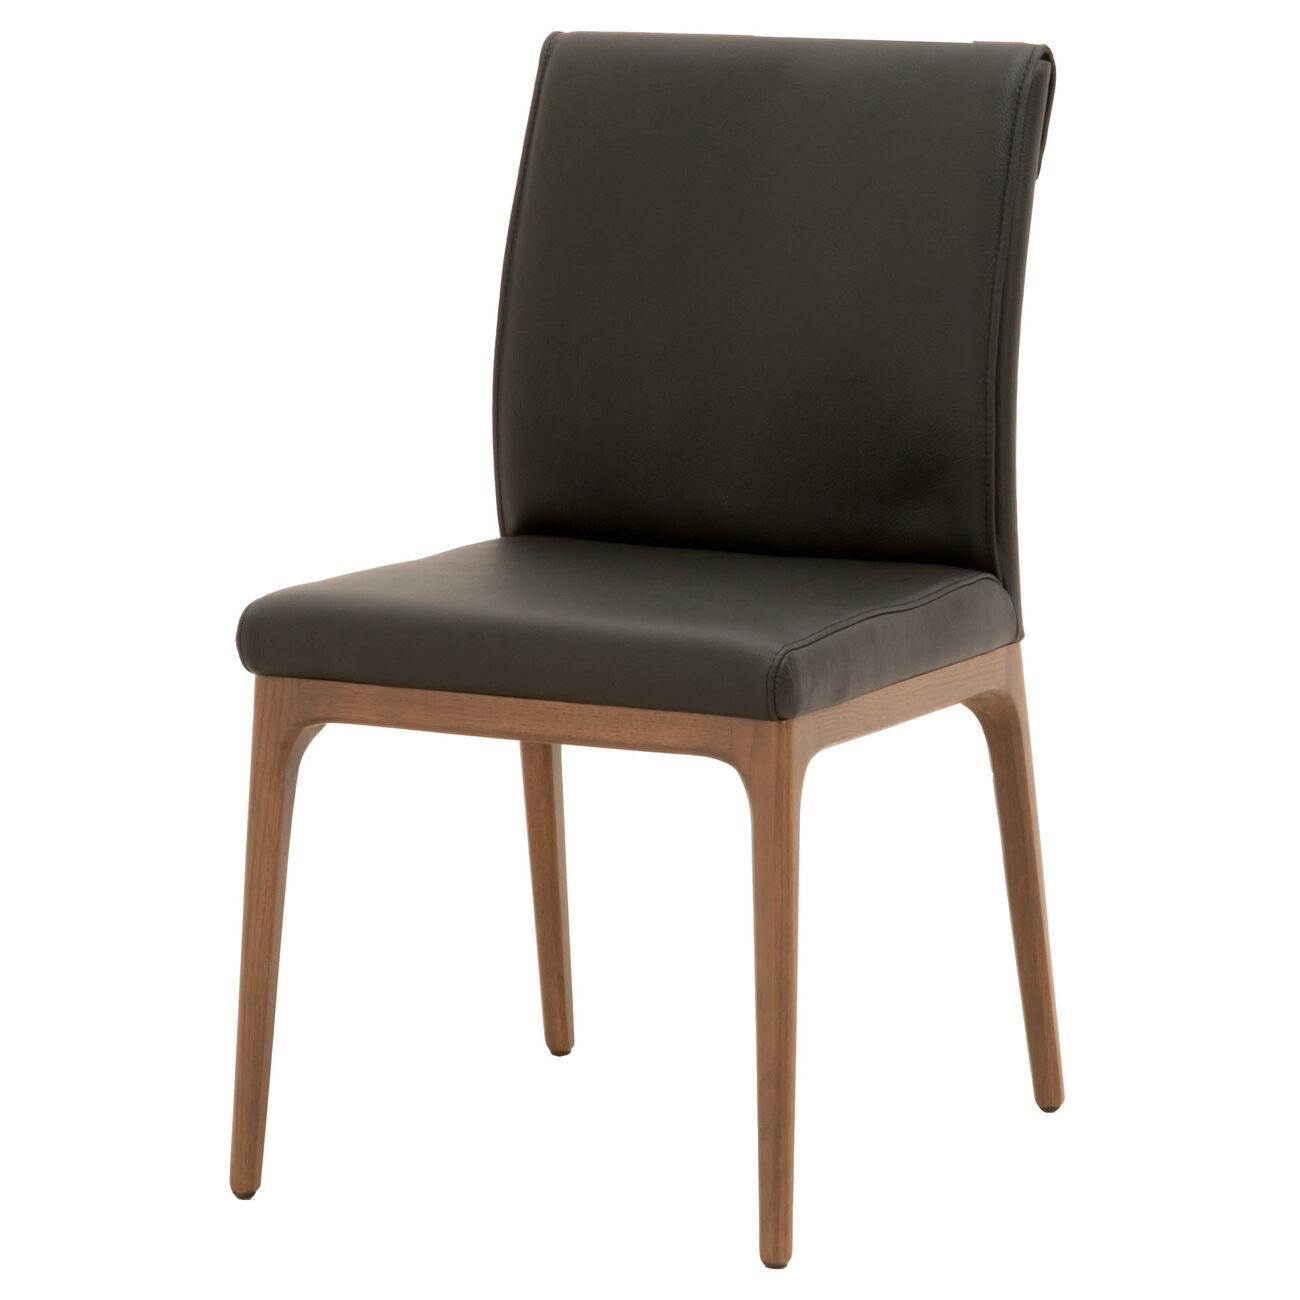 Leatherette Dining Chair with Sleigh Stitched Back,Set of 2, Sable Brown